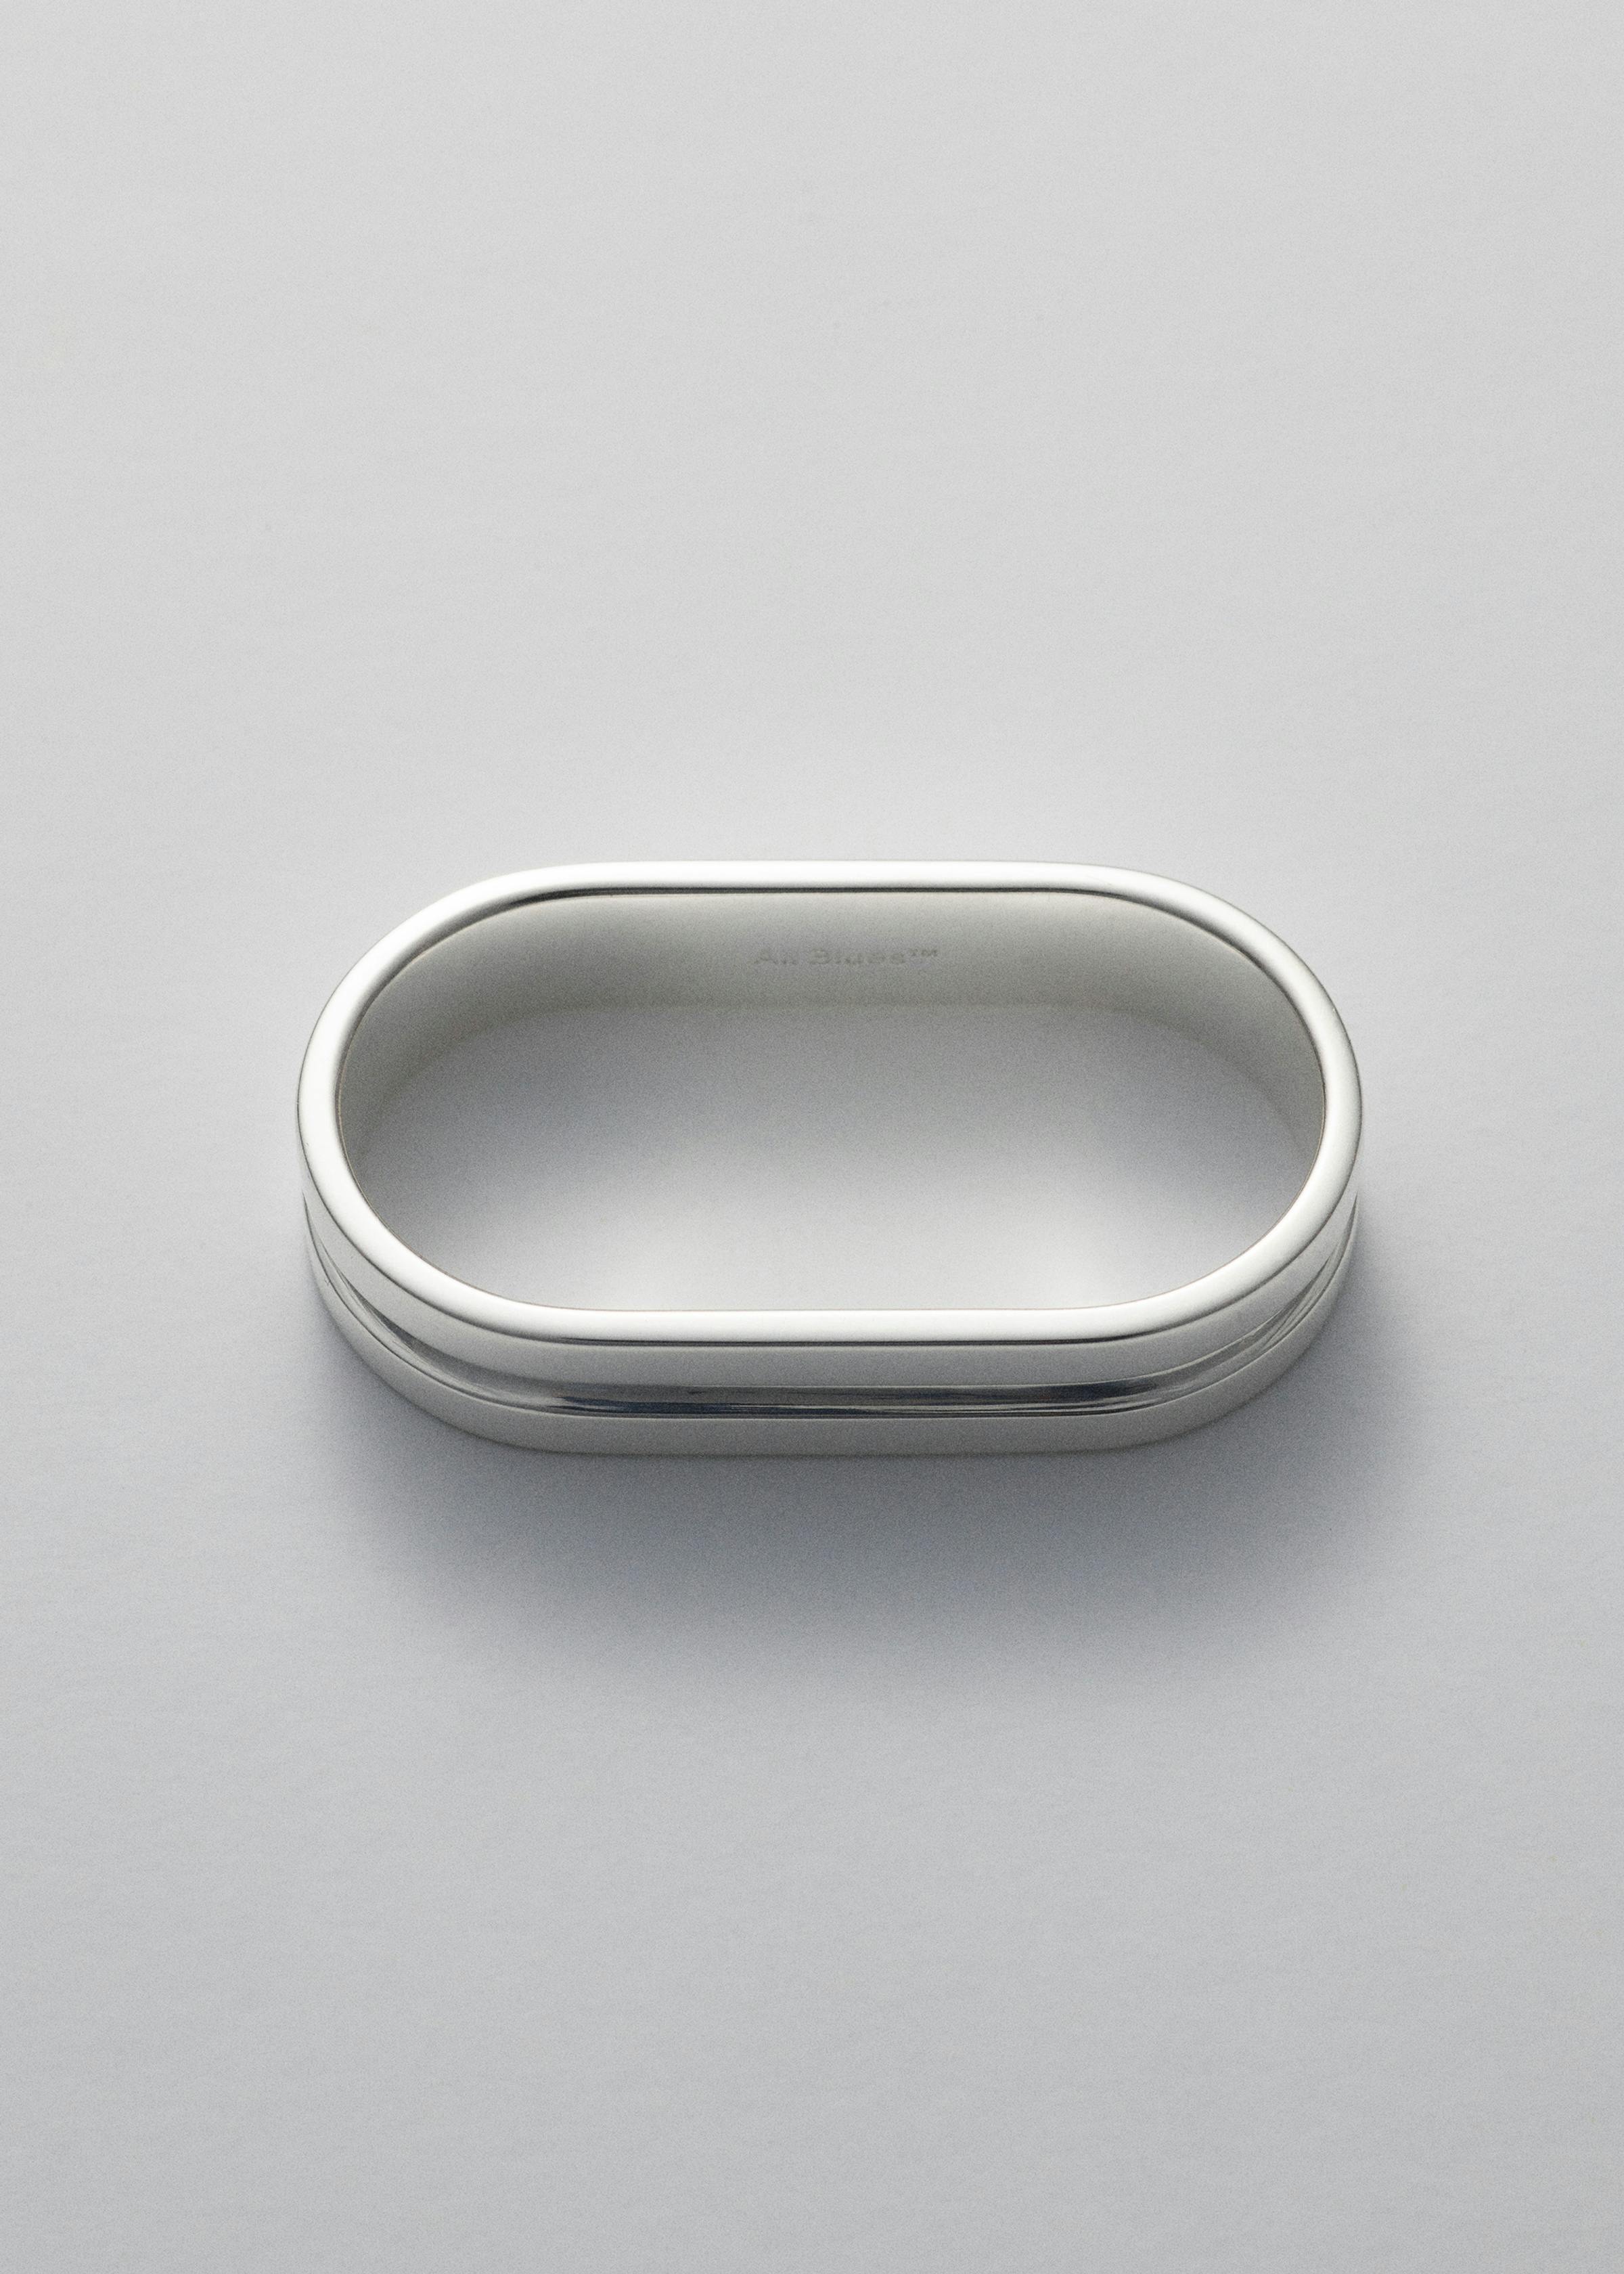 PD ring 01